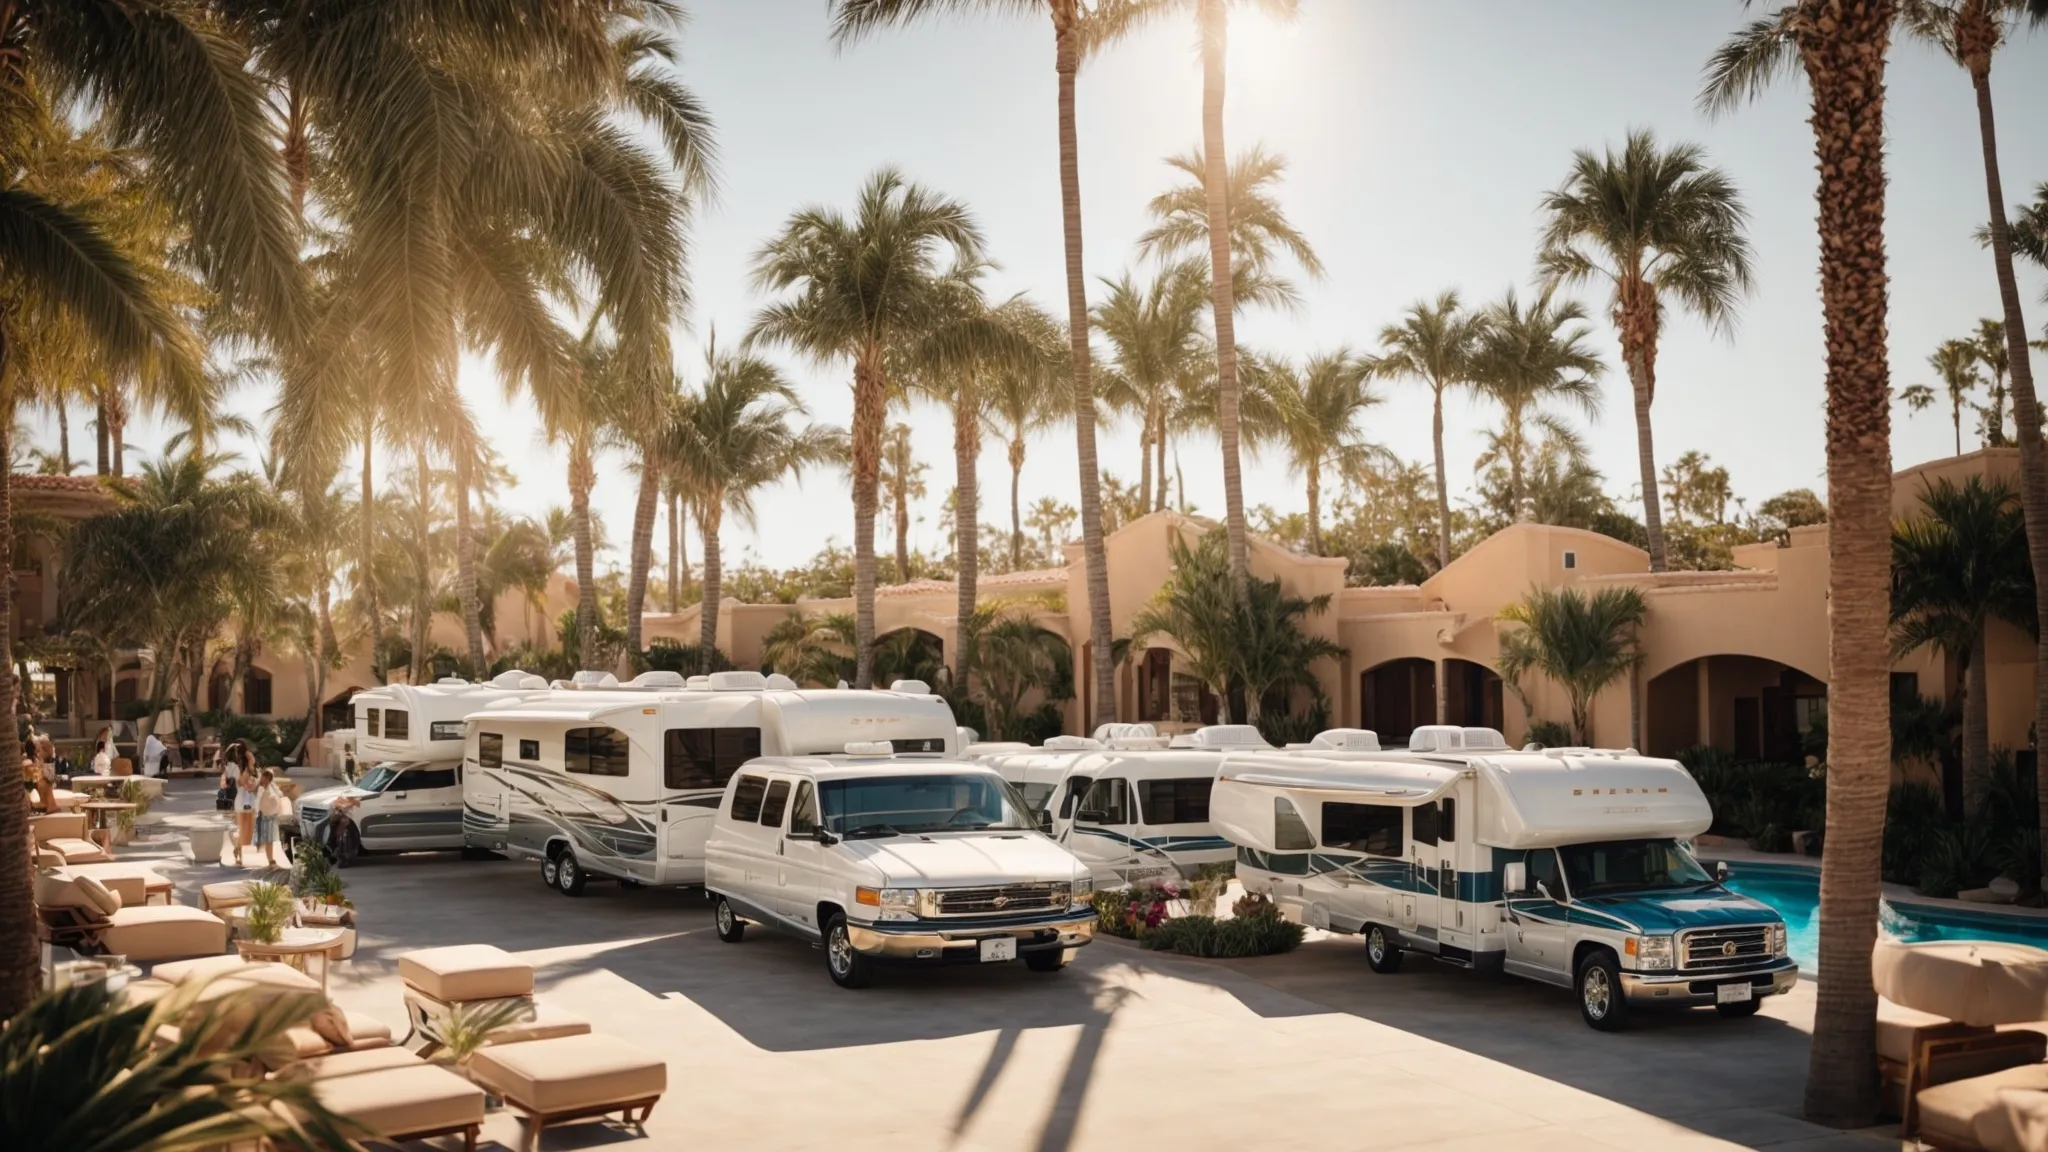 luxurious recreational vehicles parked in orderly rows amidst palm trees at a sun-drenched san diego resort, with guests lounging by a sparkling pool.